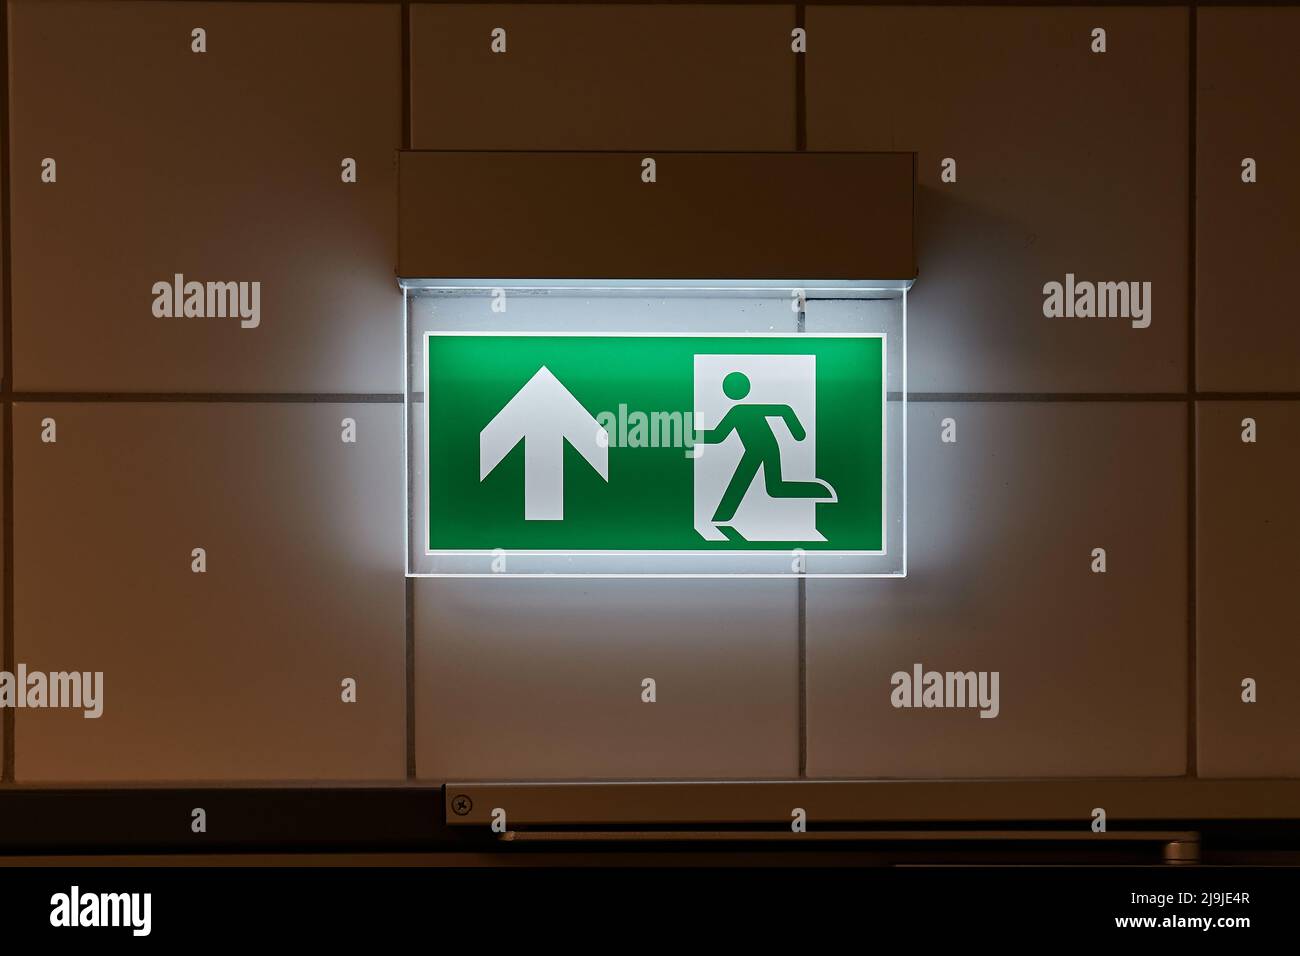 Emergency Exit Sign Stock Photo